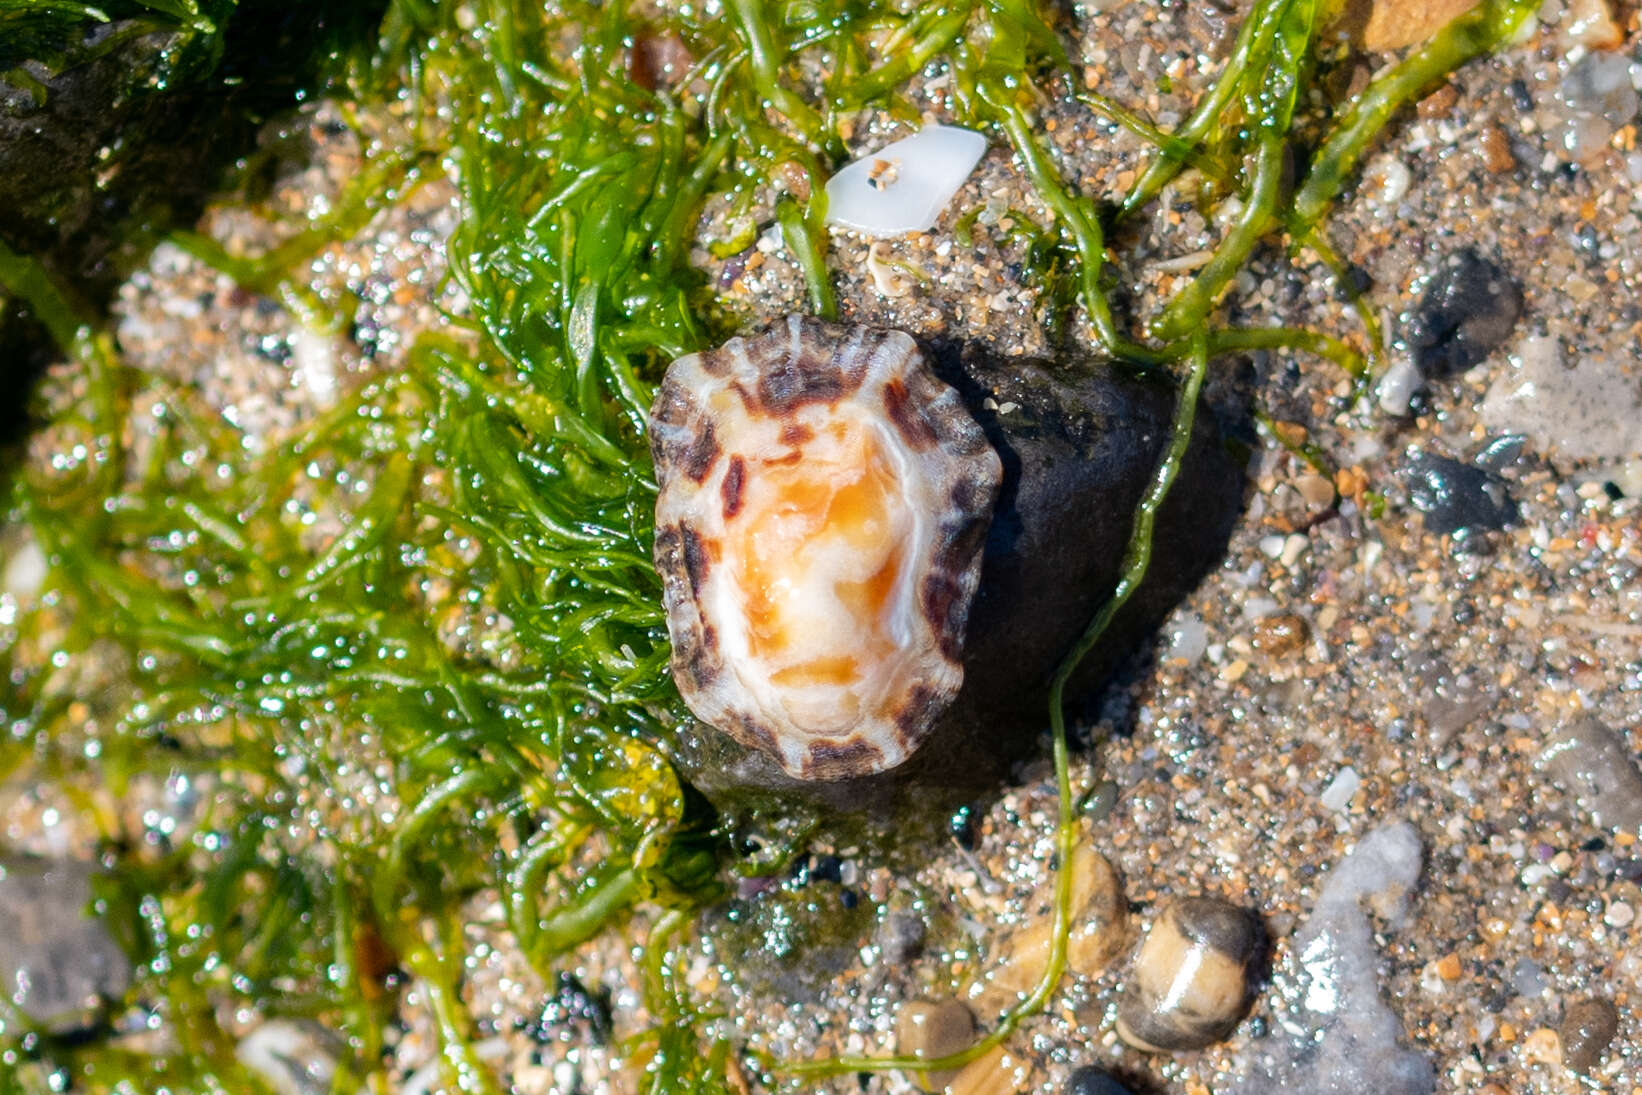 Image of Channel Island limpet